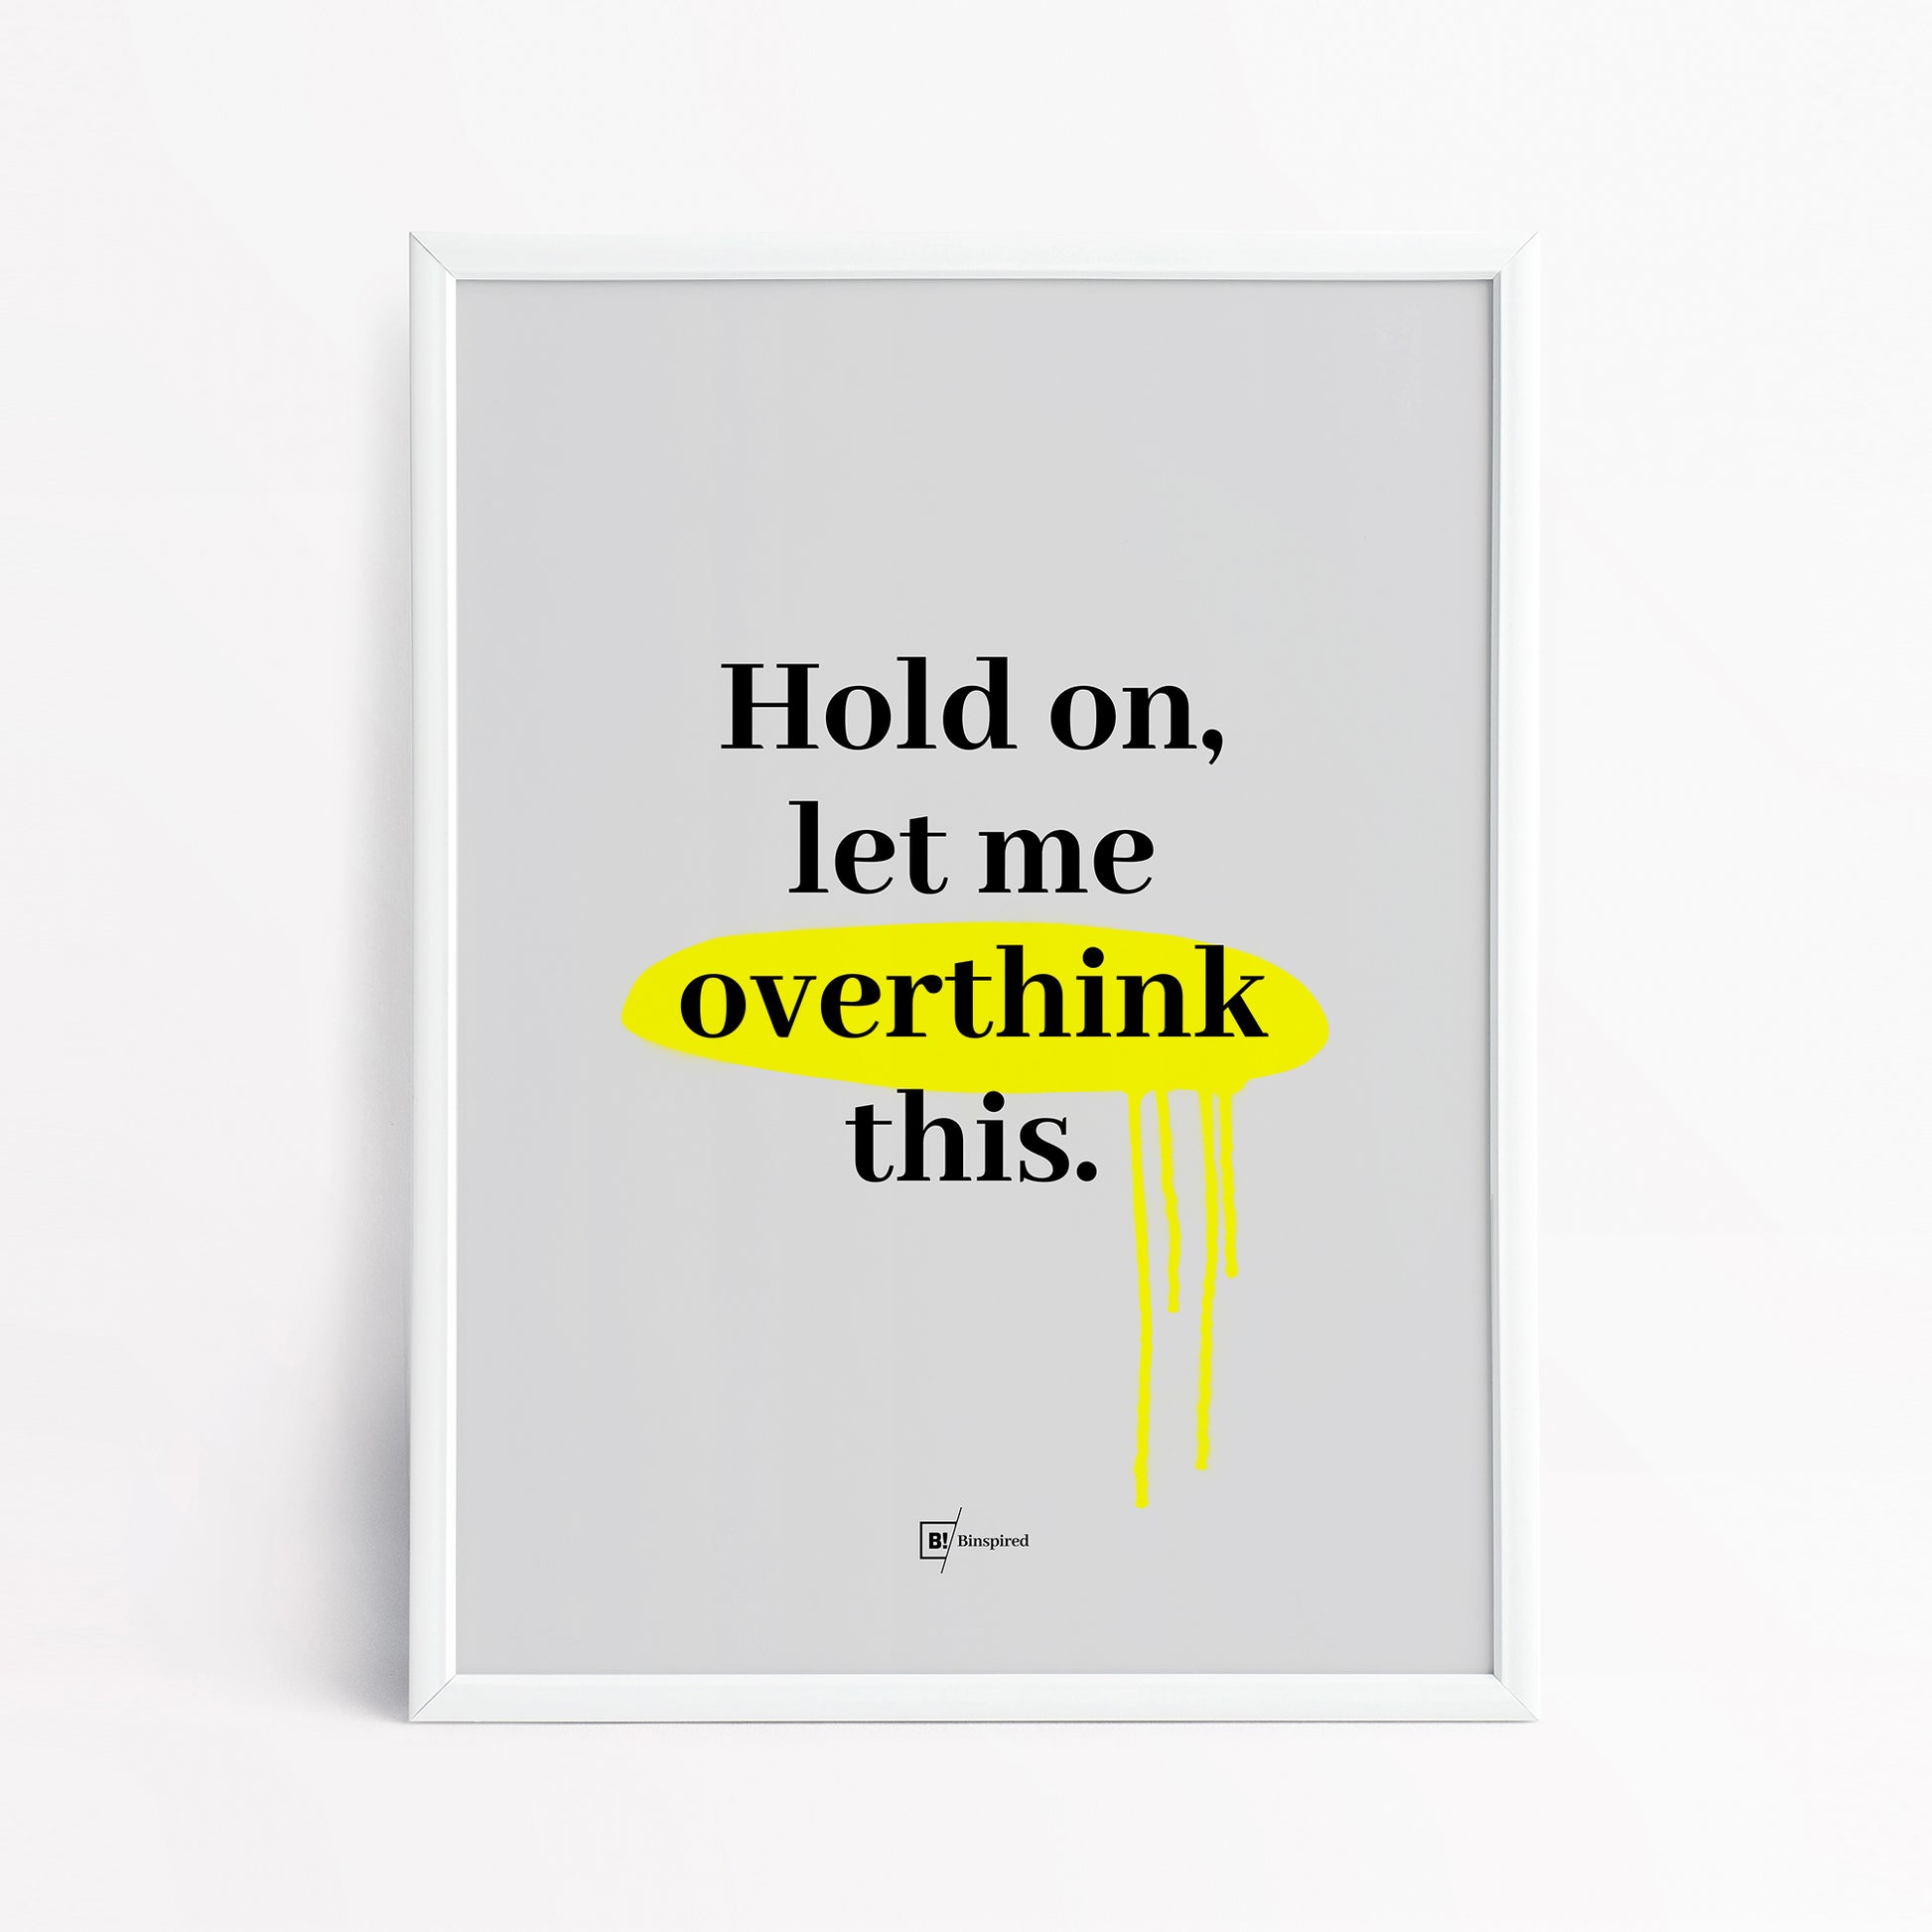 Be inspired by our "Hold on, let me overthink this" quote art print! This artwork was printed using the giclée process on archival acid-free paper and is presented in a simple white frame that captures its timeless beauty in every detail.